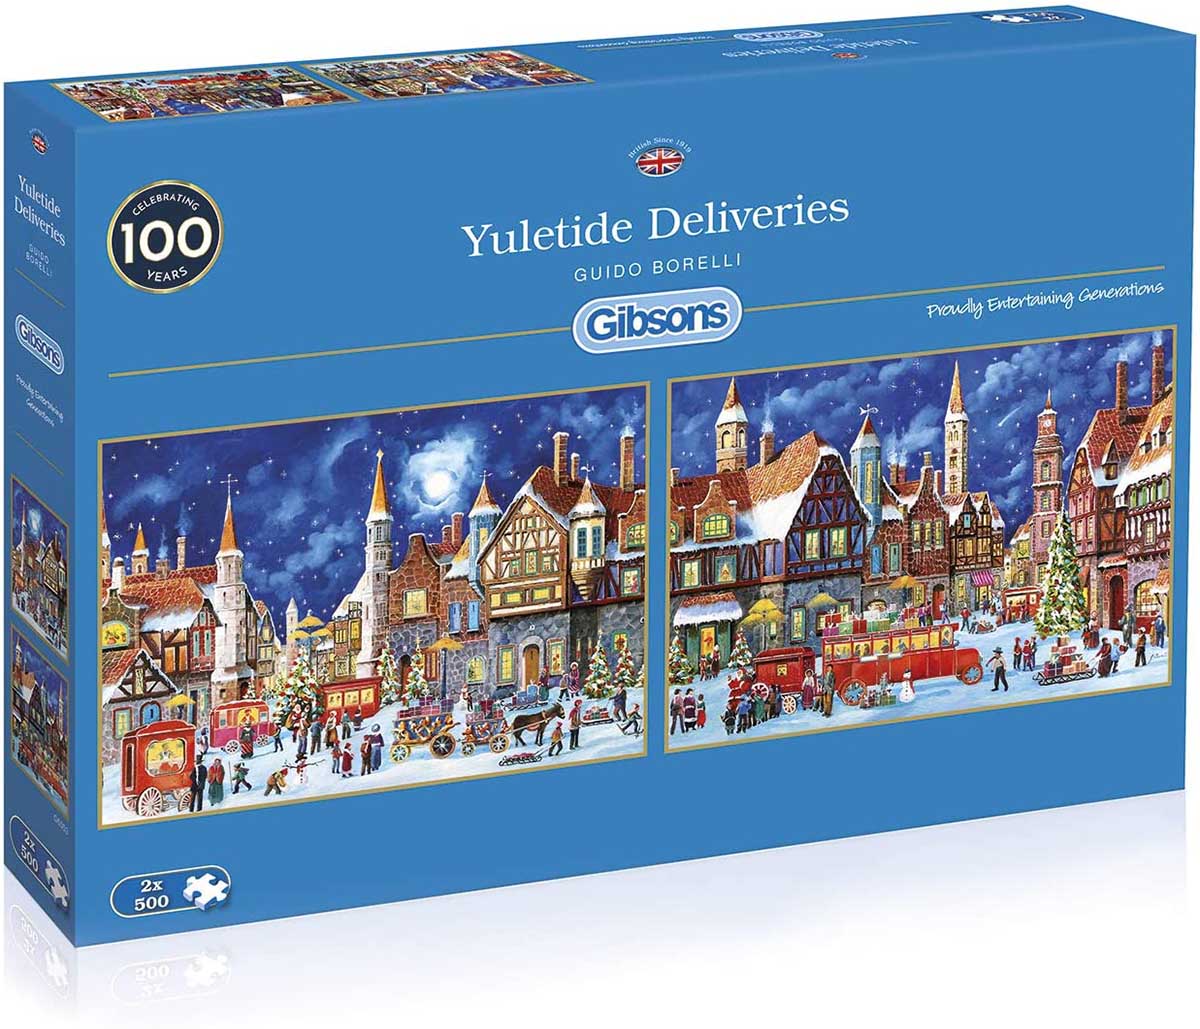 Yuletide Deliveries Winter Jigsaw Puzzle